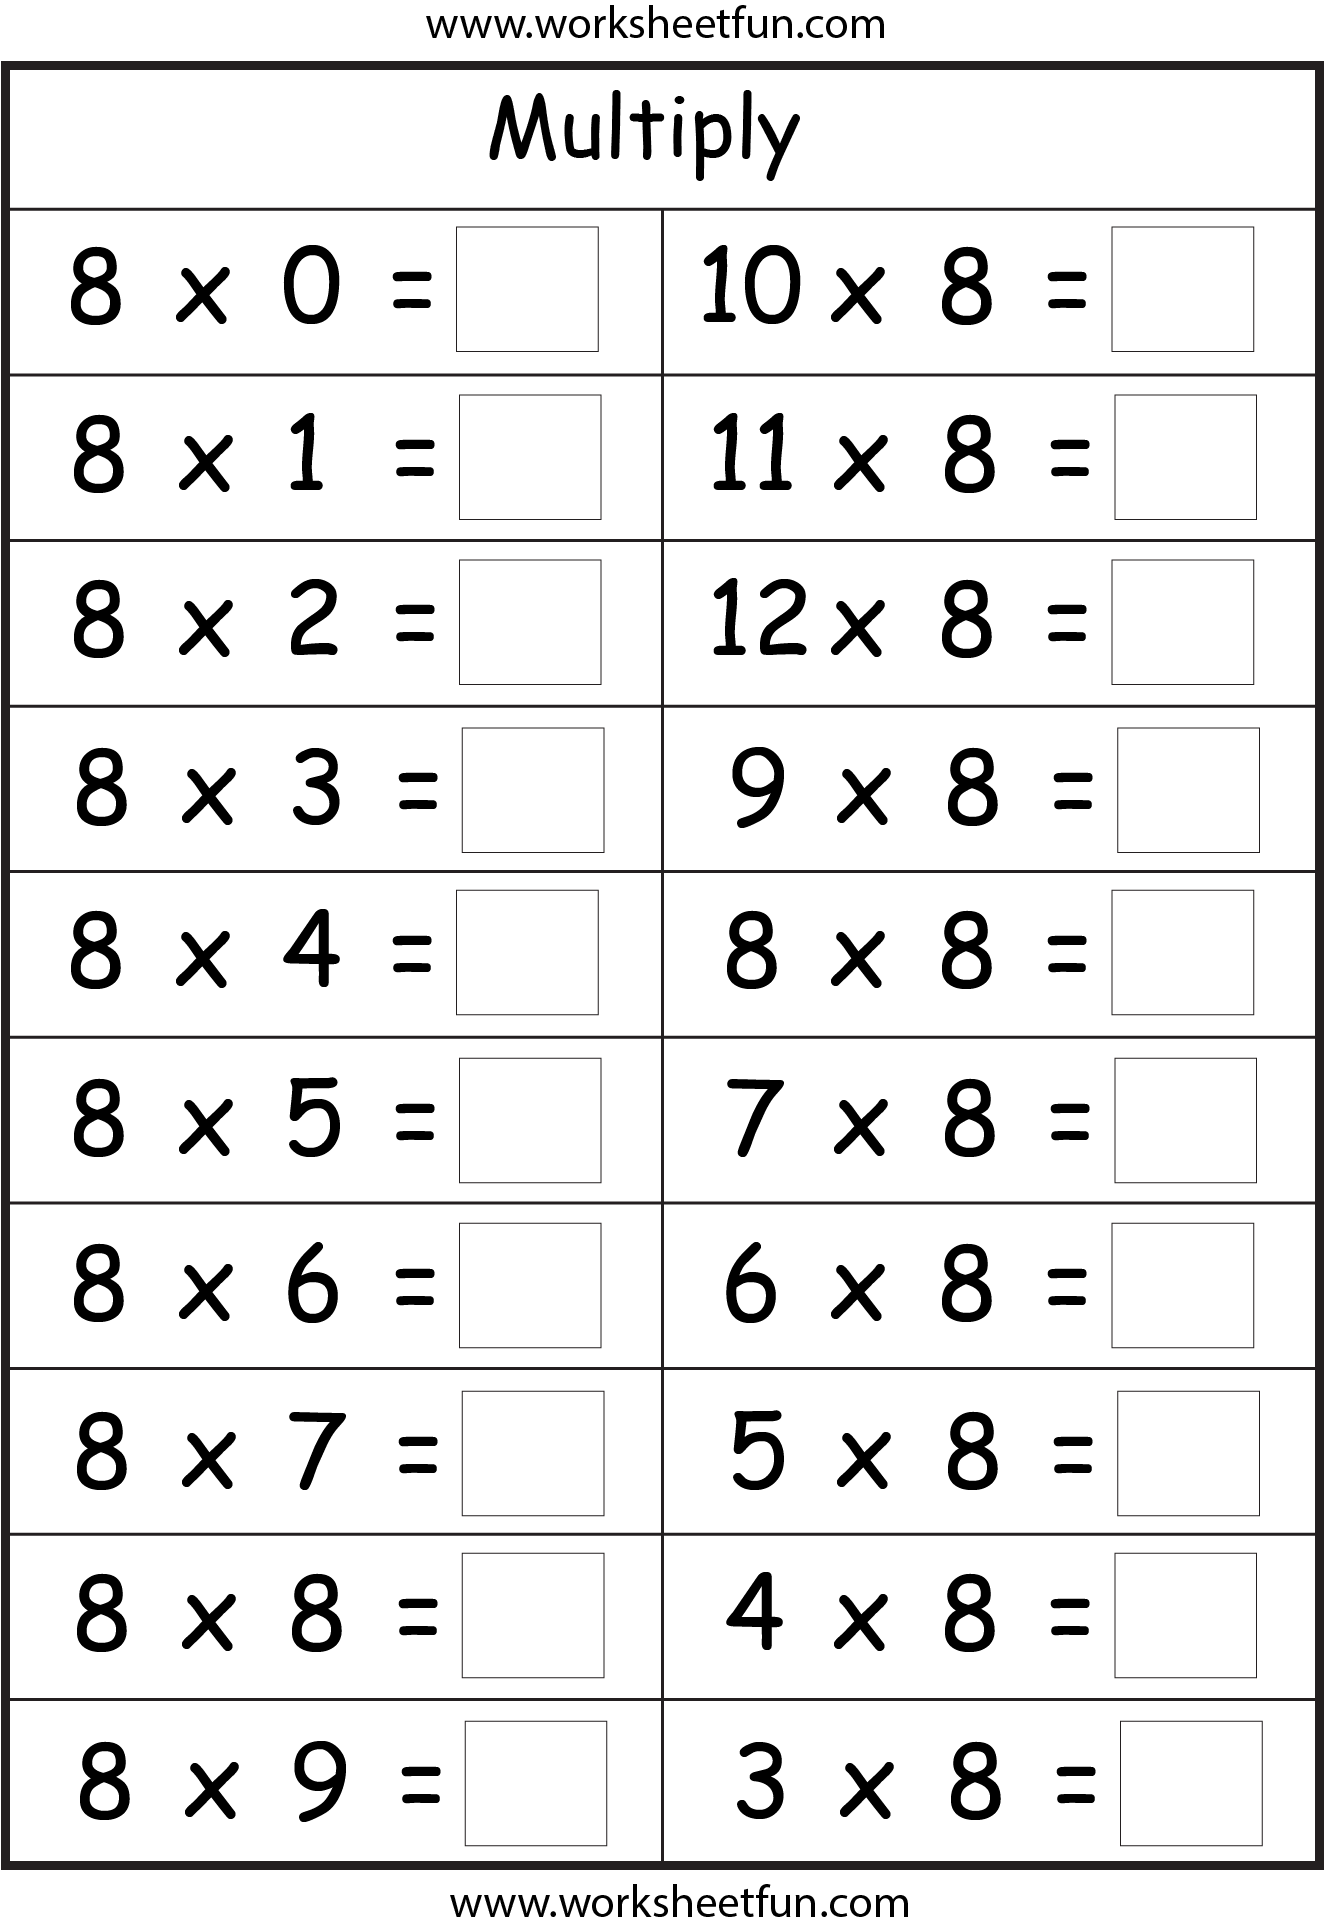 multiplication-basic-facts-2-3-4-5-6-7-8-9-times-tables